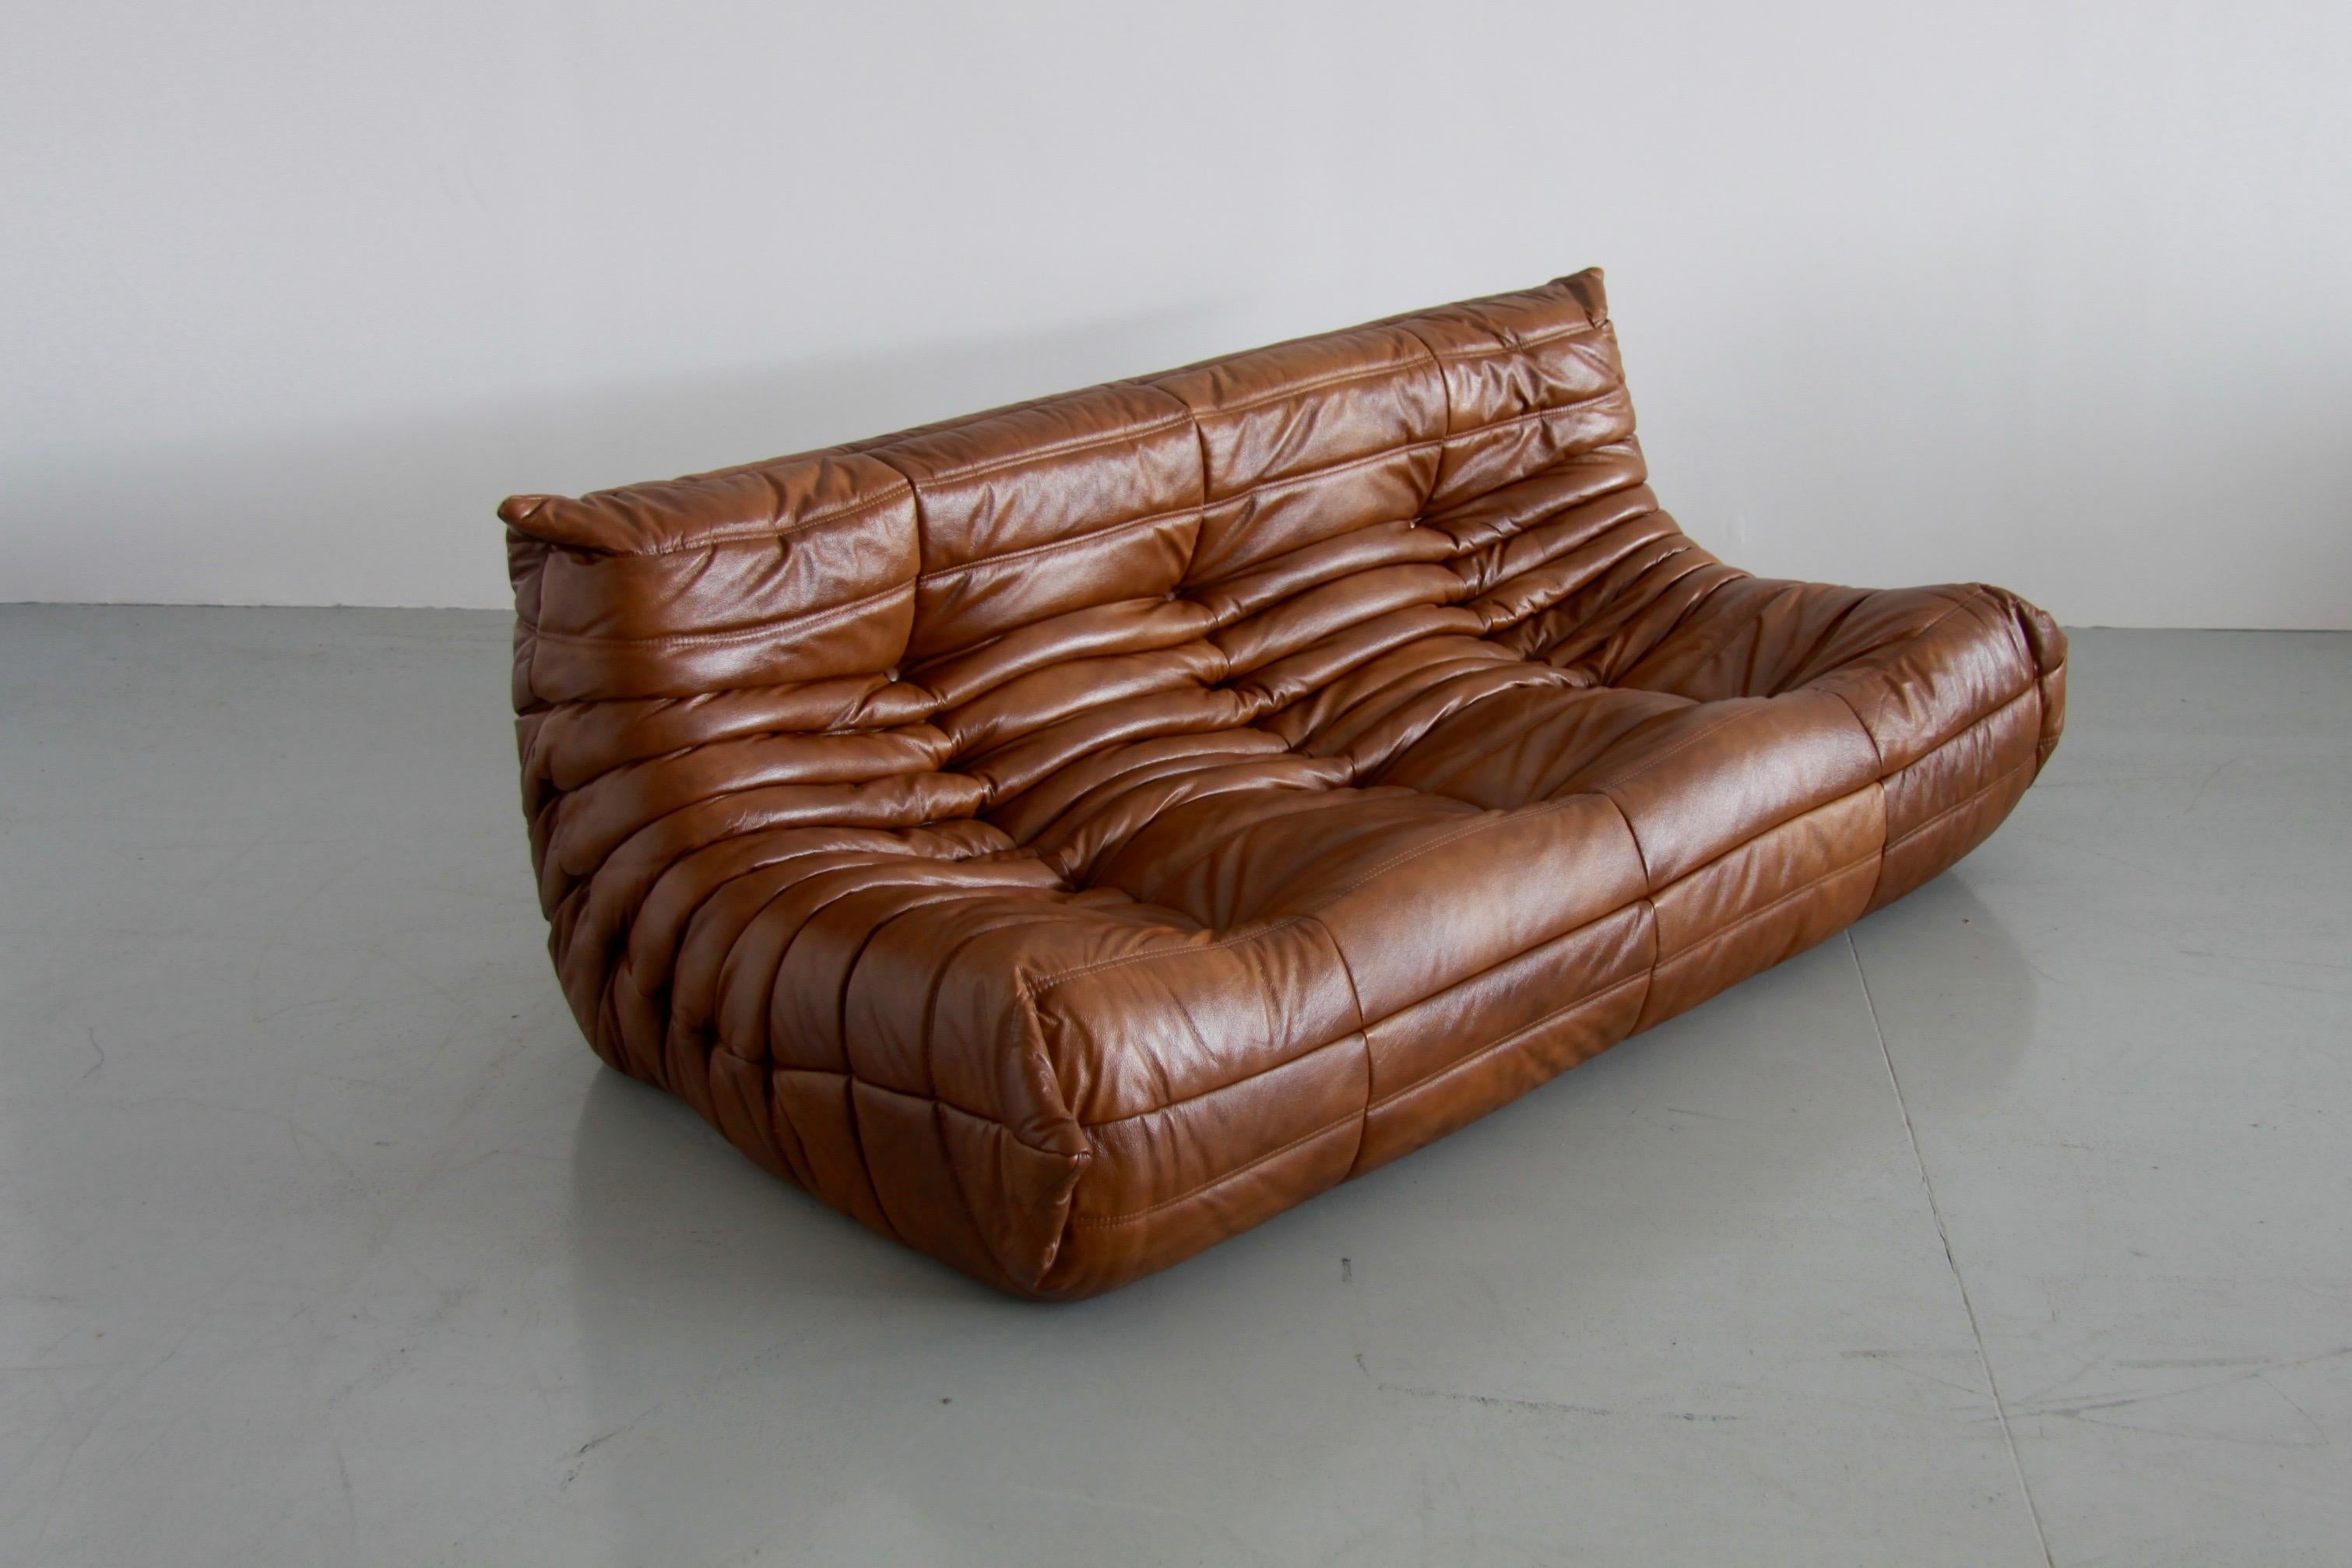 This Togo three-seat sofa was designed by Michel Ducaroy in the 1970s and was manufactured by Ligne Roset in France. It has been reupholstered in new whiskey leather (70 x 172 x 102 cm). It has the original Ligne Roset logo and genuine Ligne Roset